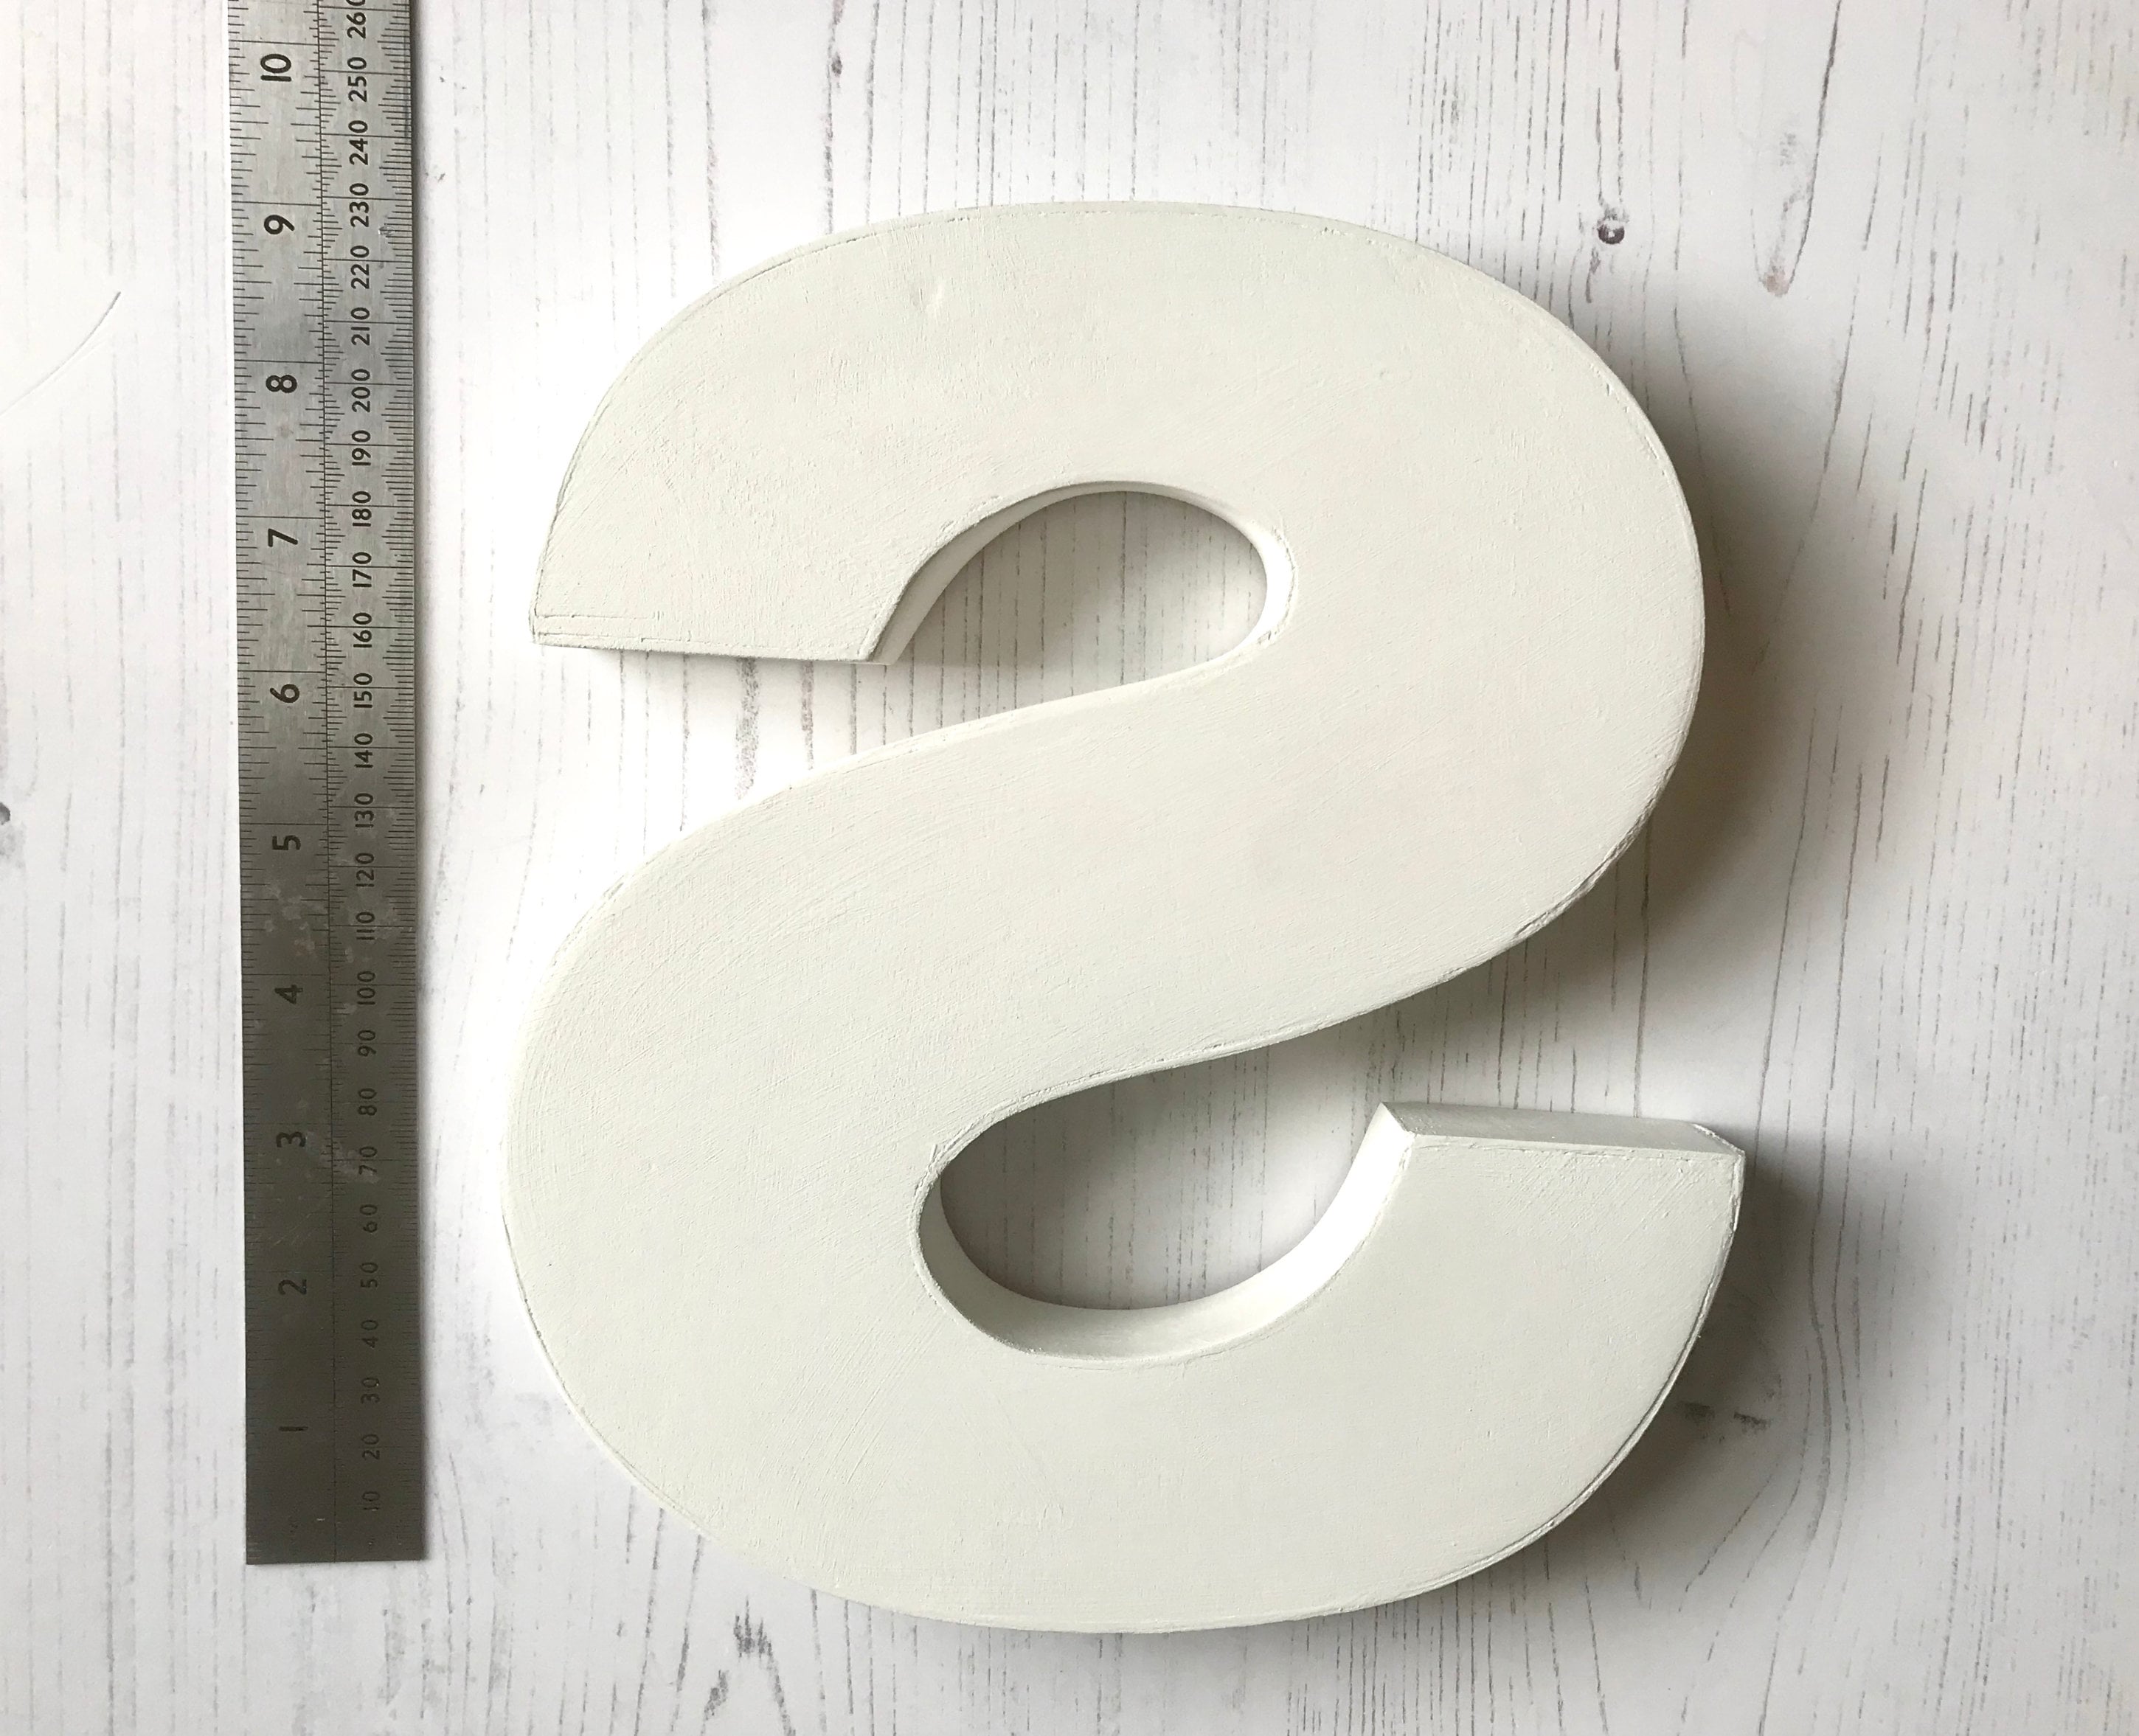 Free Standing Wooden Letters for Wedding Table Centerpiece, Wood